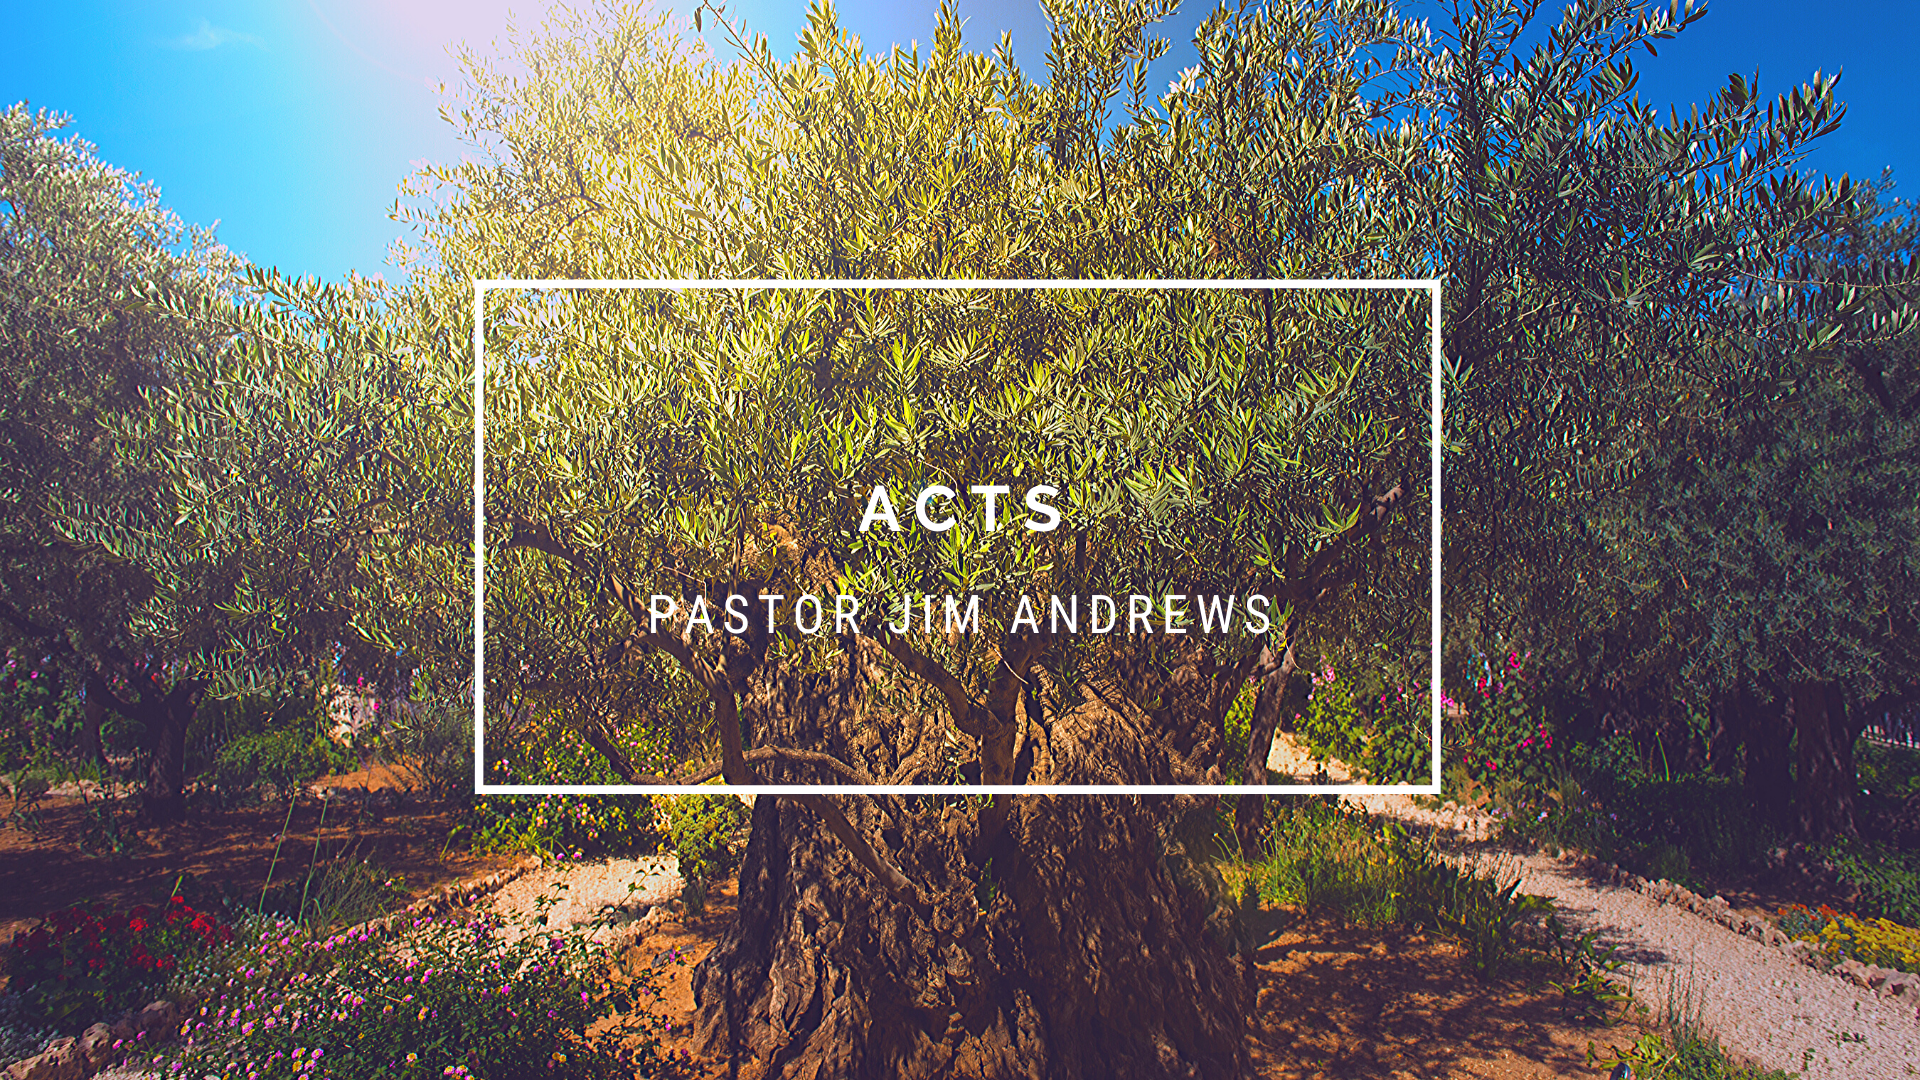 Acts 15:1-5, Part 1